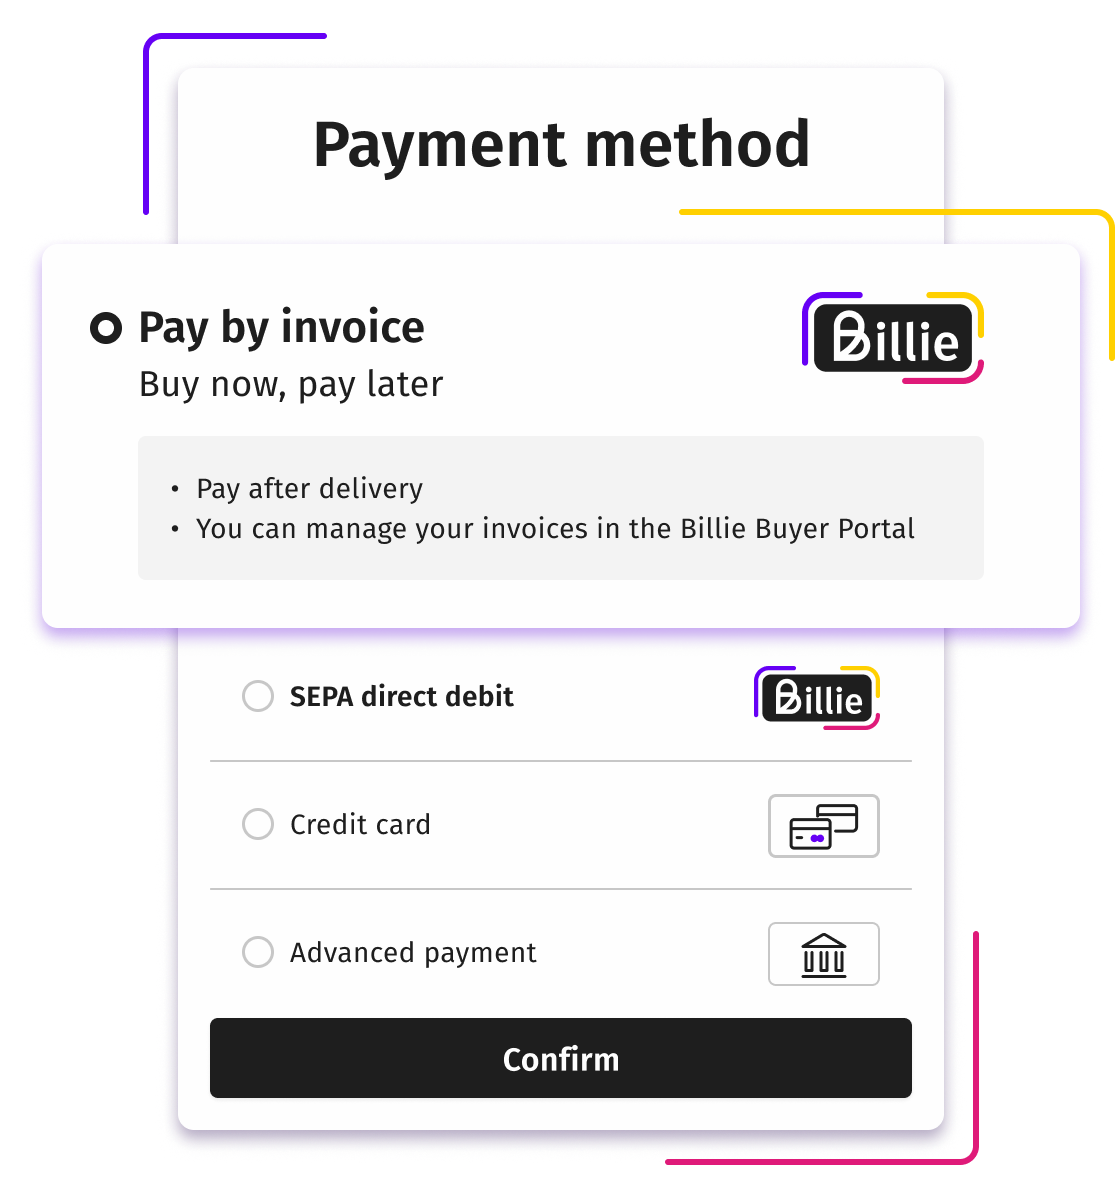 B2B payment methods with Billie